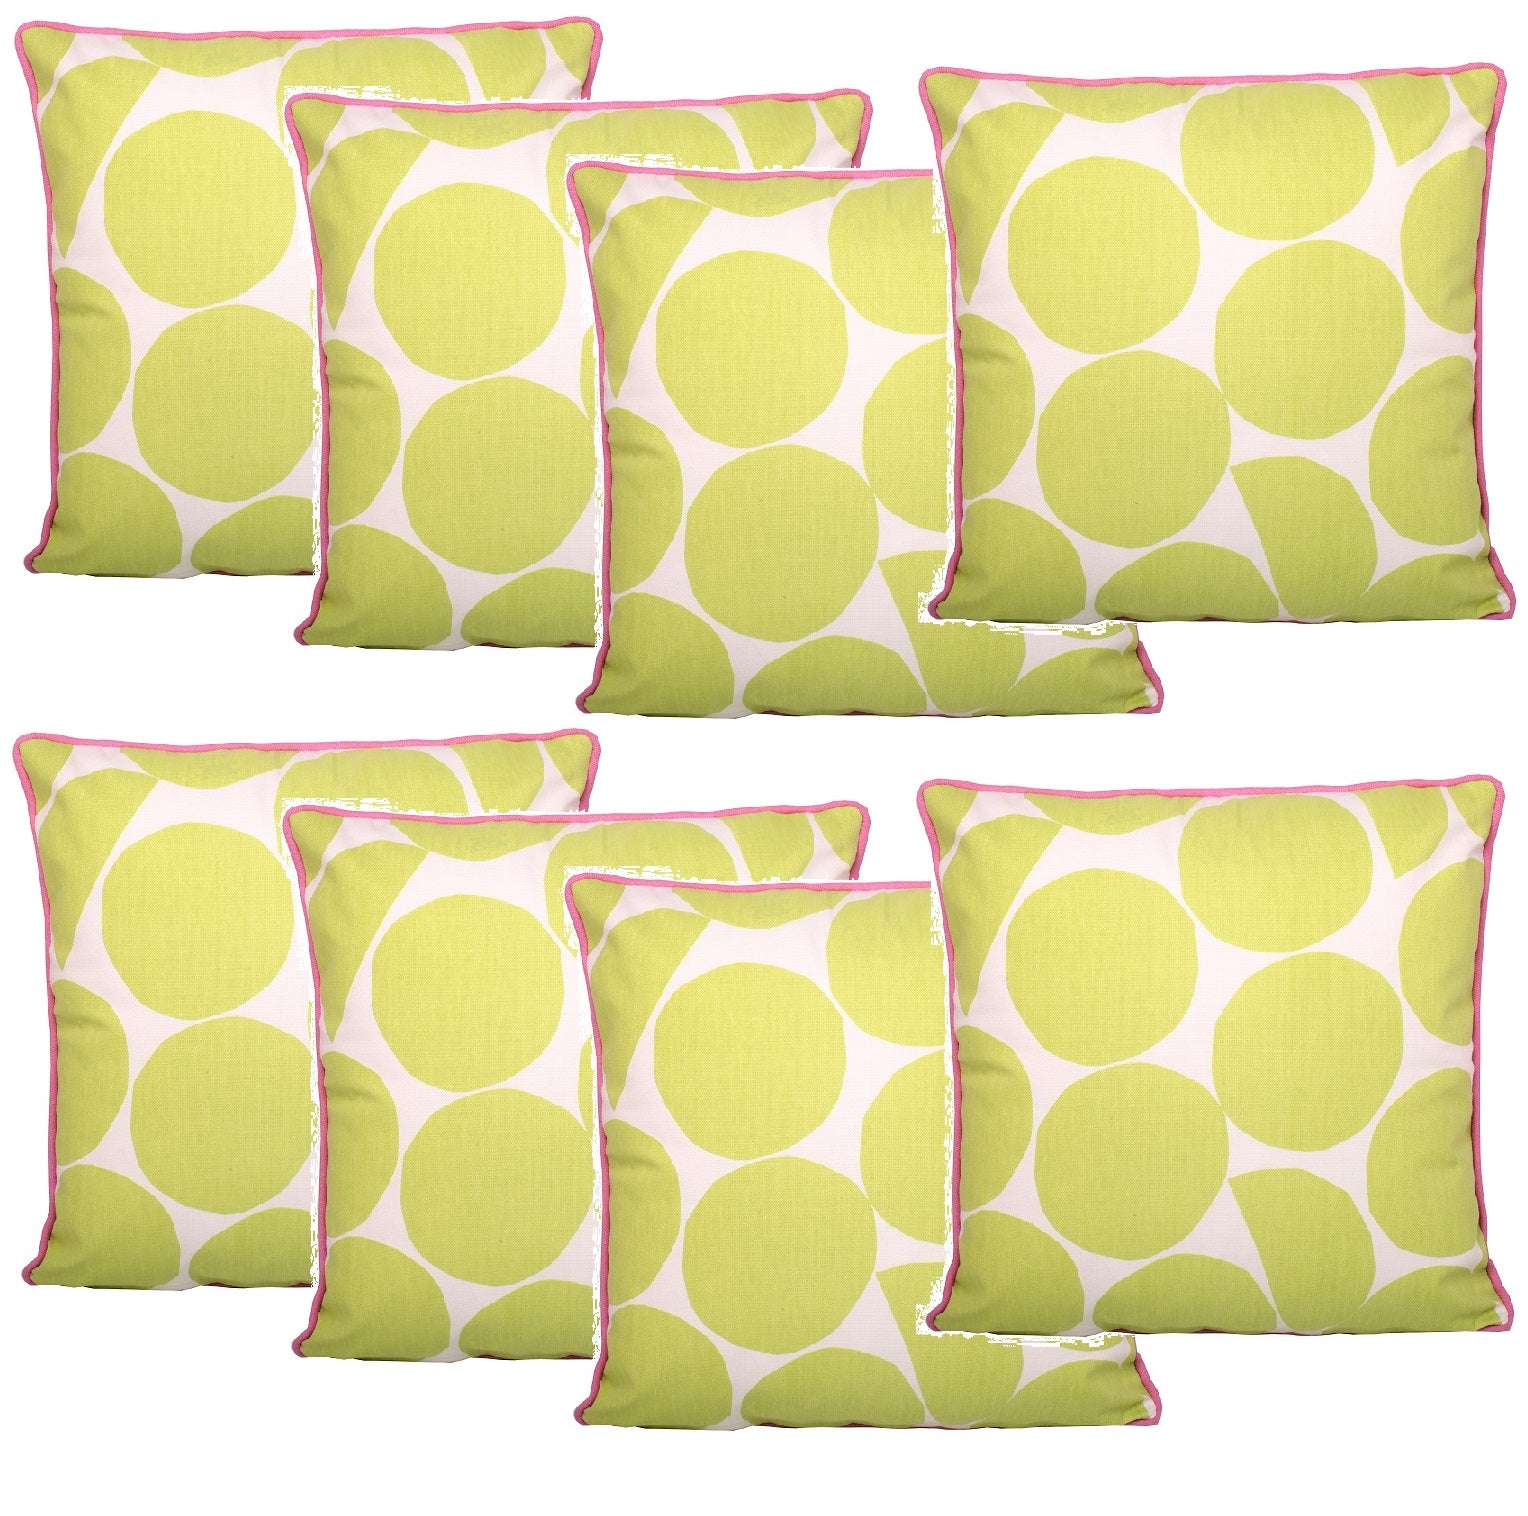 8pc Outdoor Cushion Cover Pink Green